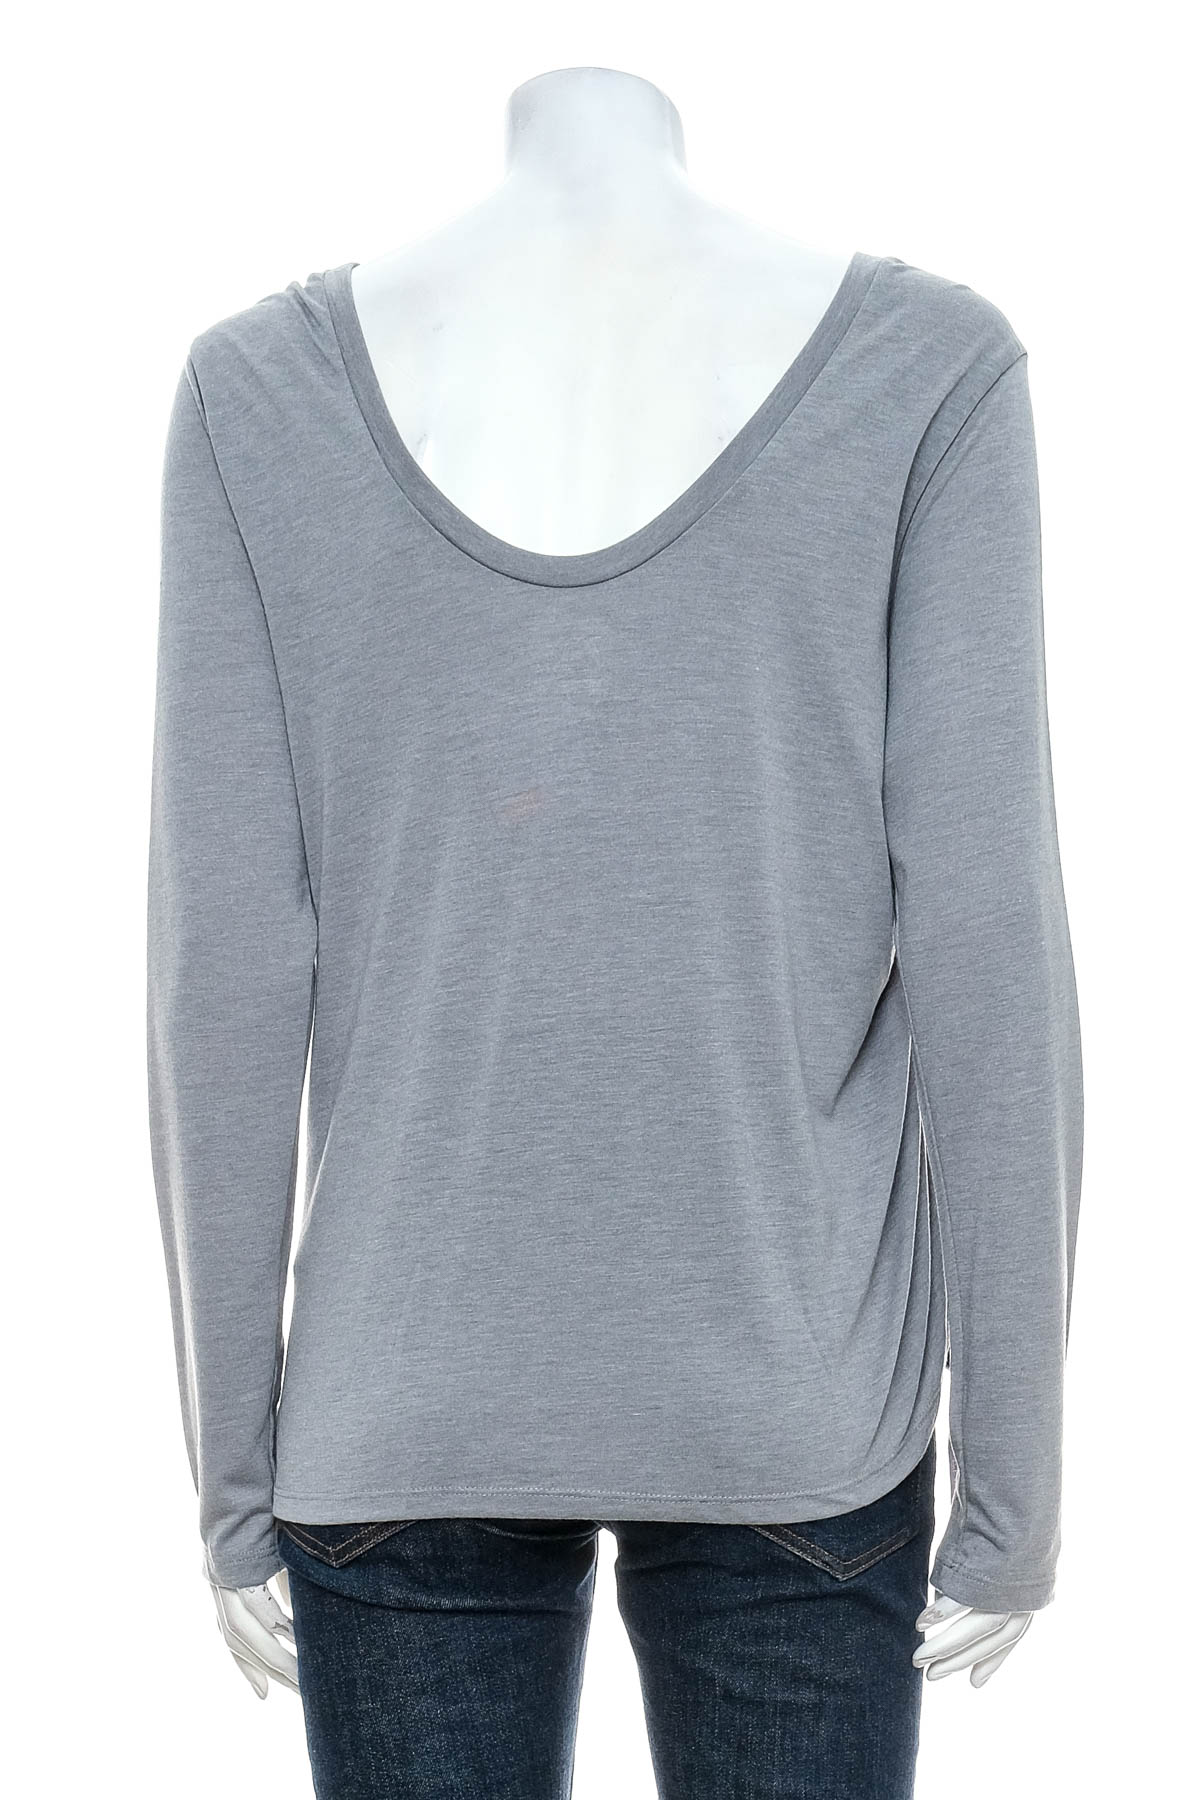 Women's blouse - OLD NAVY ACTIVE - 1